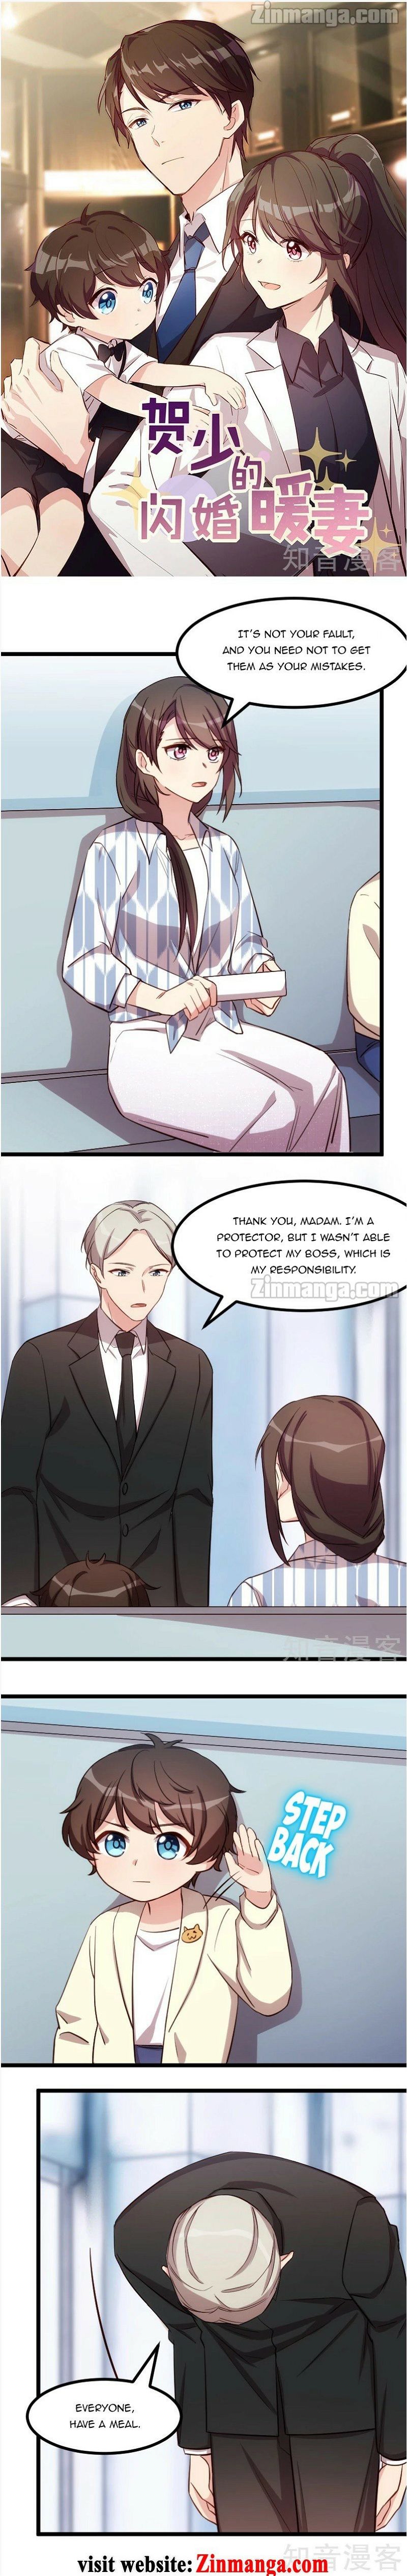 CEO's Sudden Proposal Chapter 209 page 1